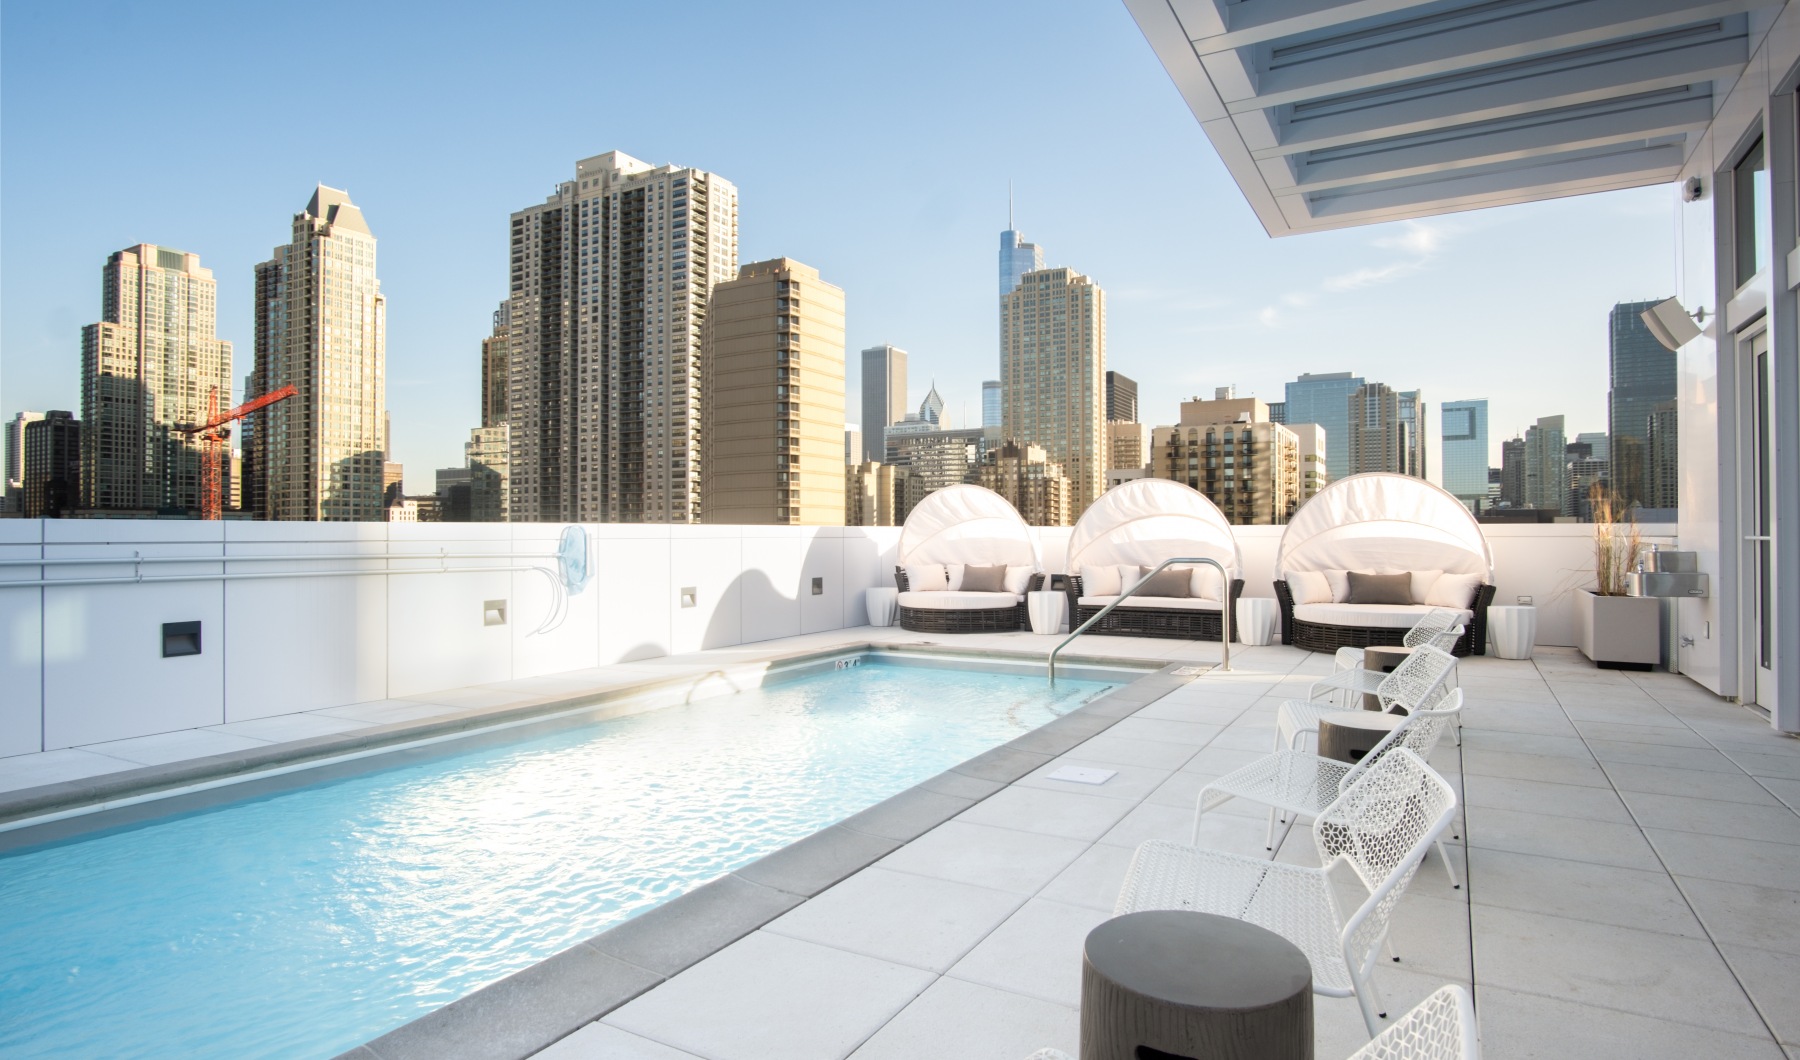 rooftop swimming pool surrounded by plush lounge seating